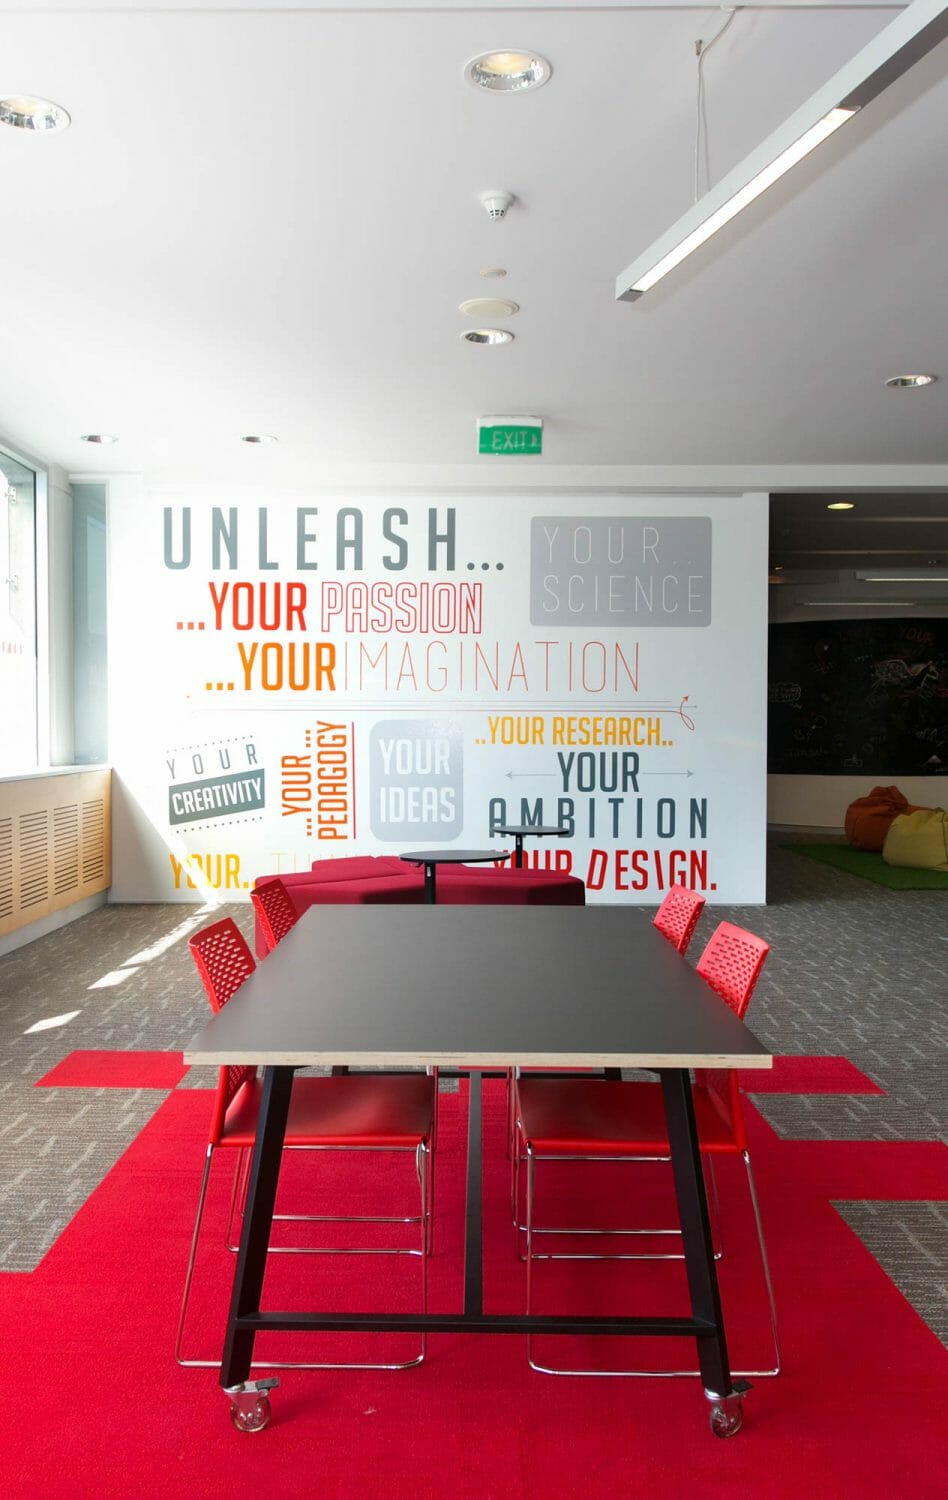 Wall Graphics of Unleash - University of Auckland